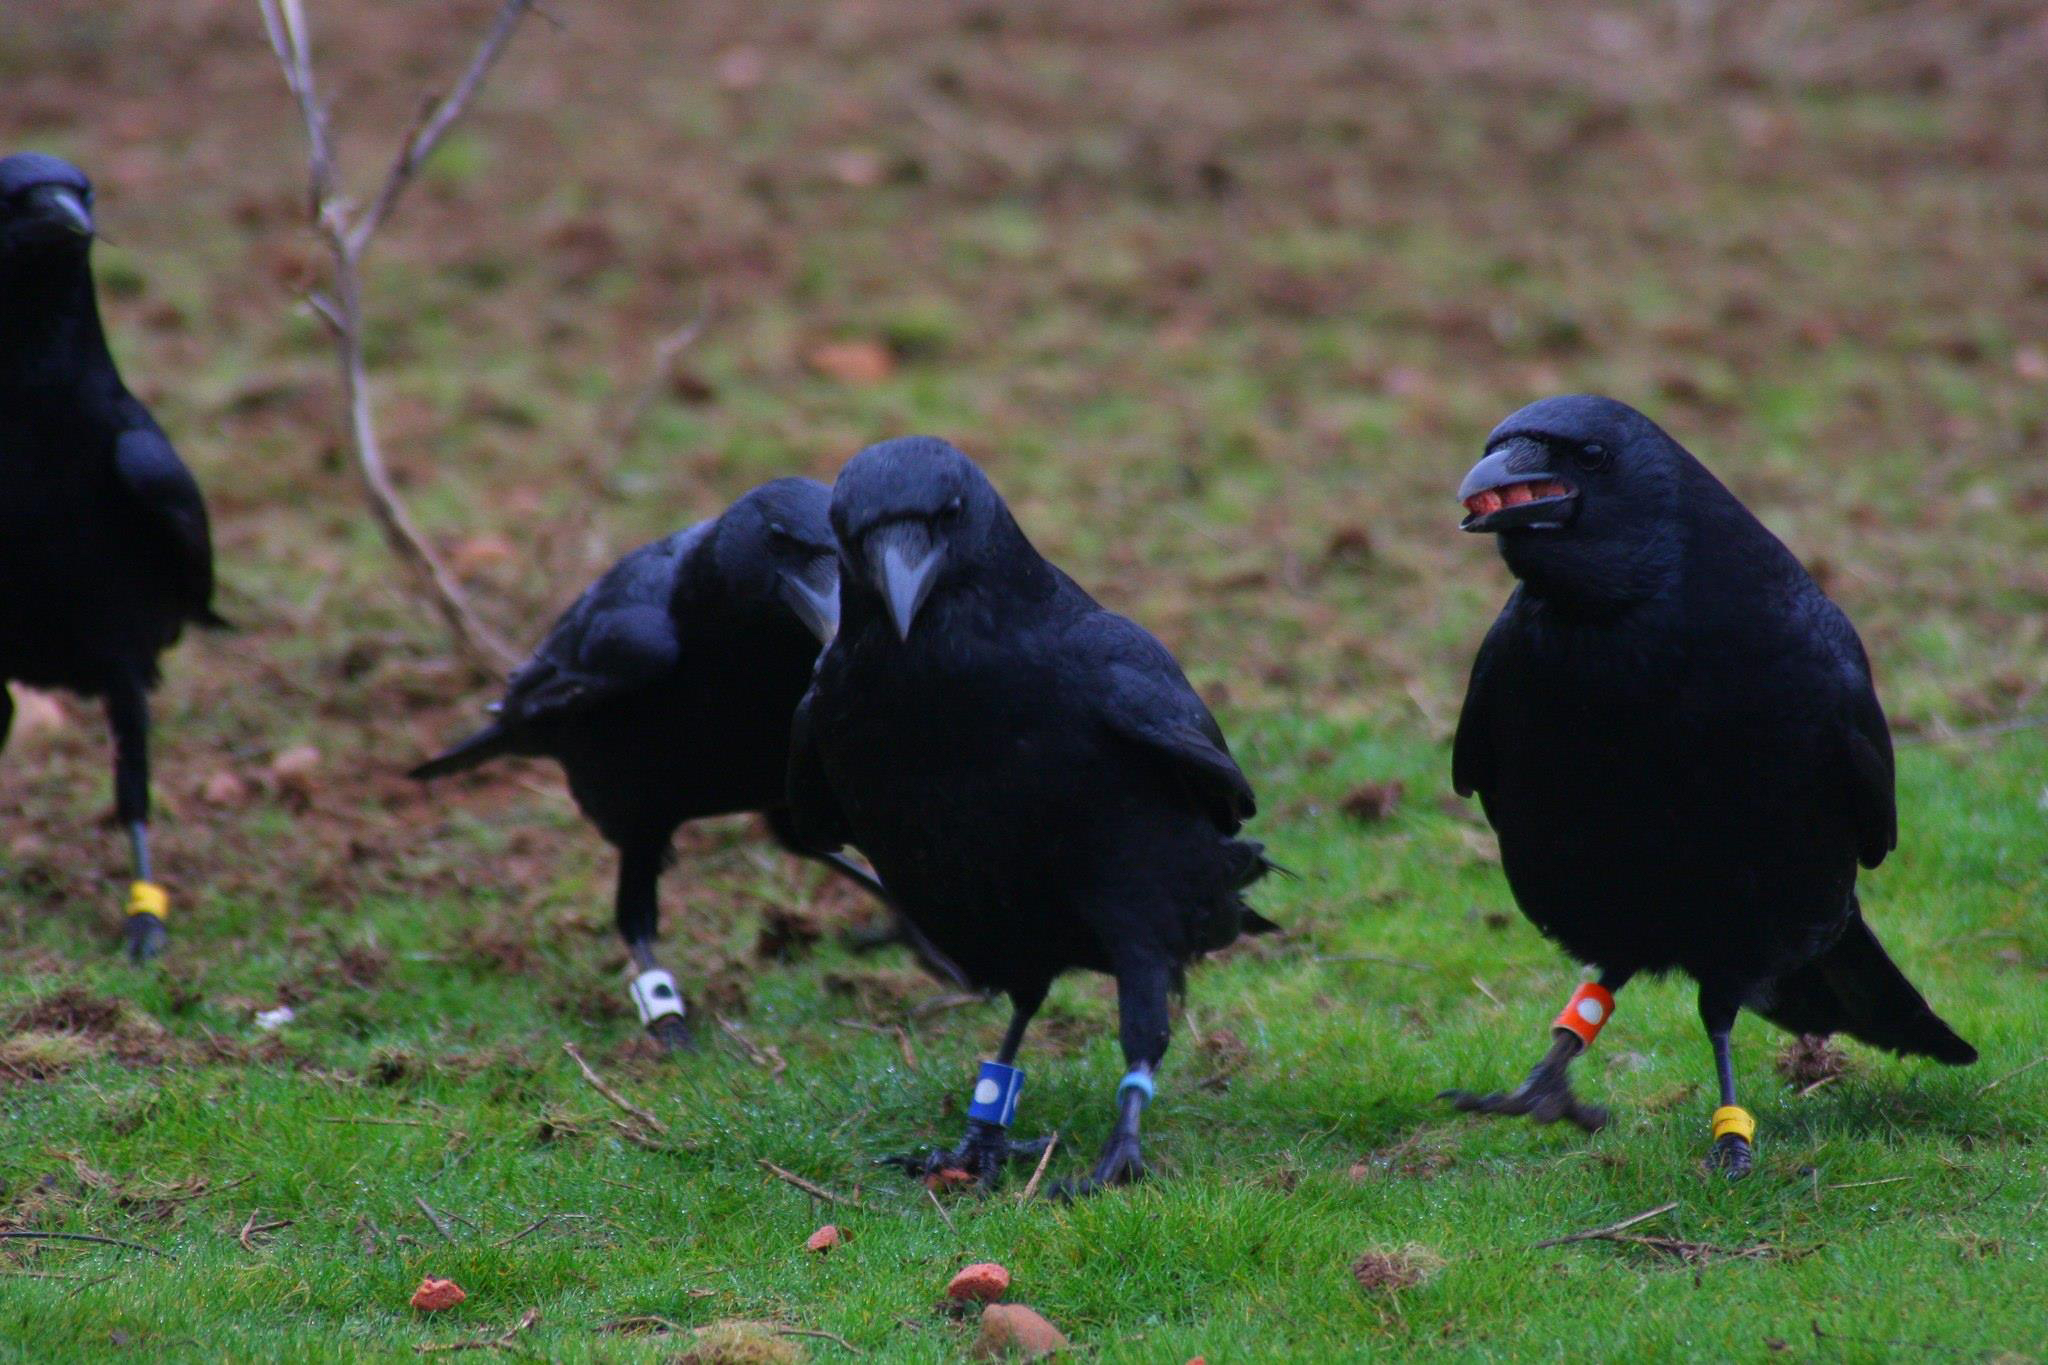 group of carrion crows